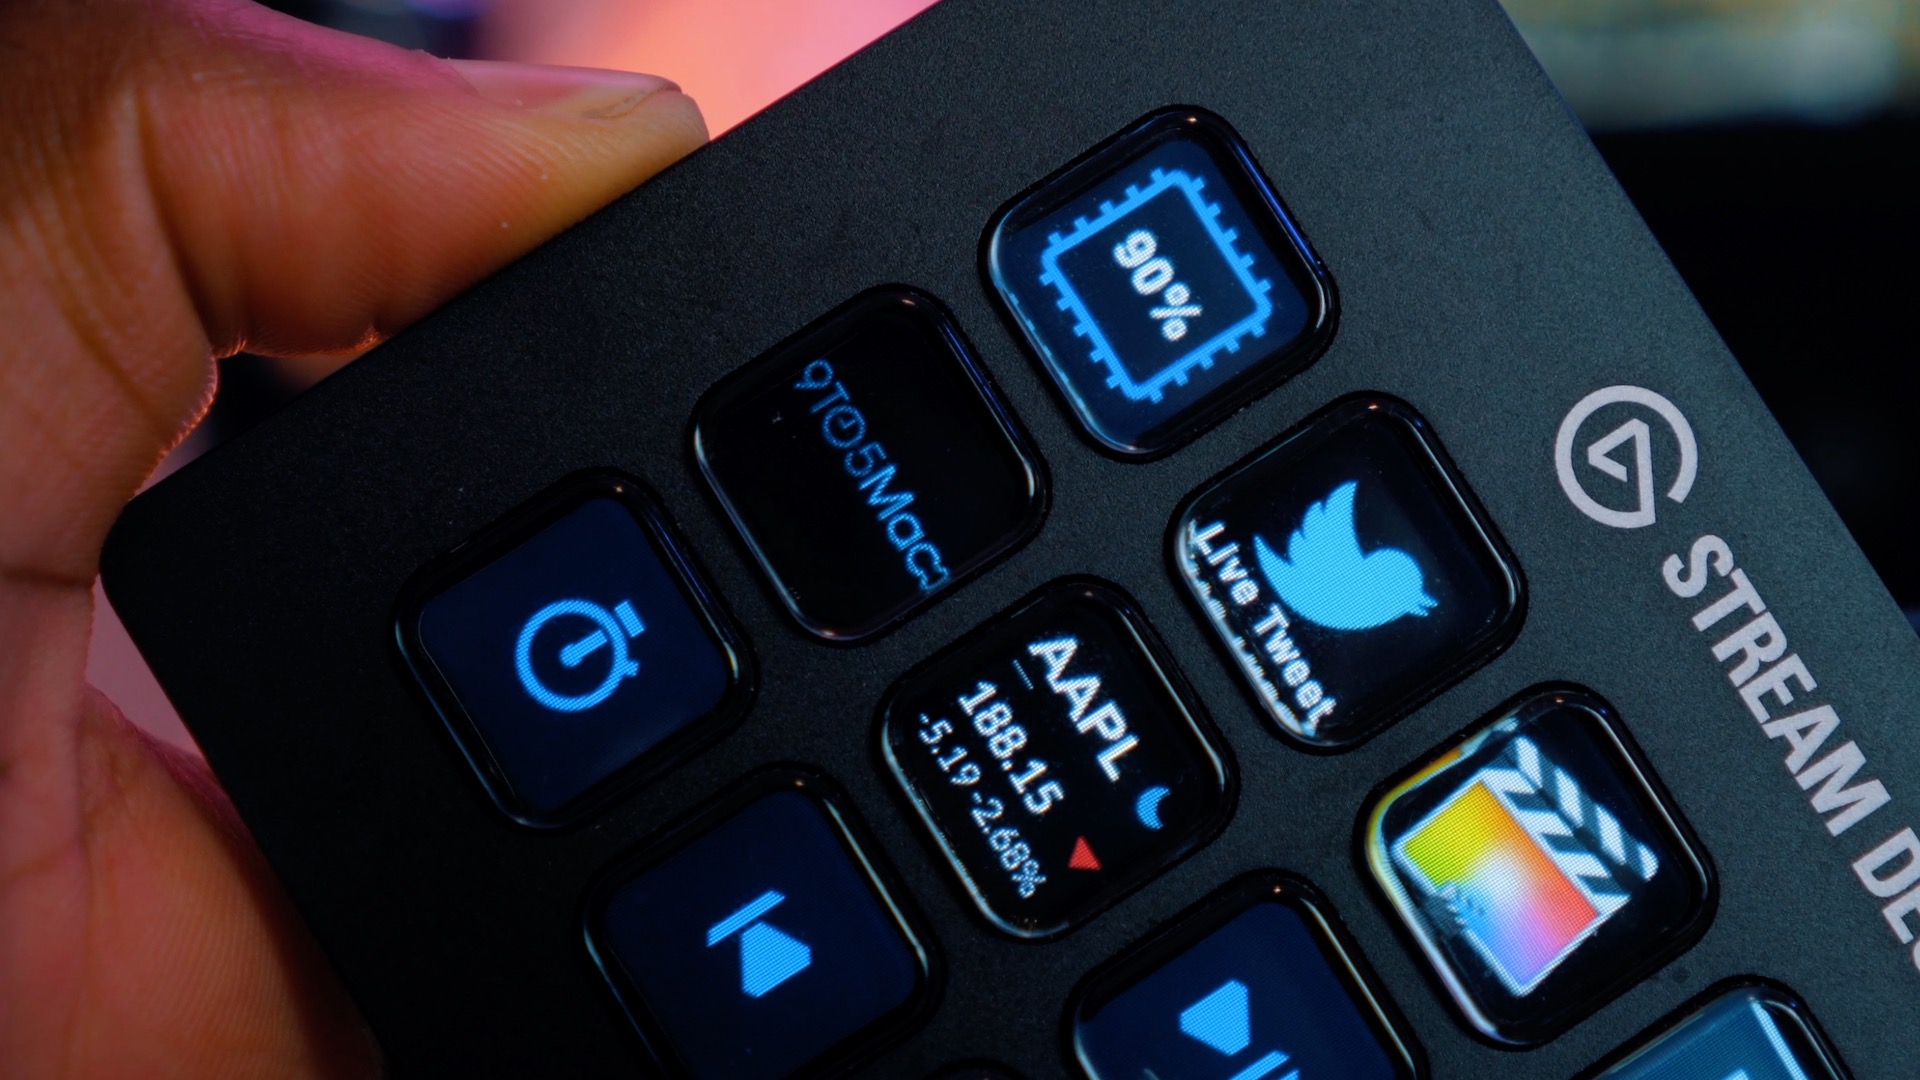 Elgato Stream Deck: Helps improve your live-streaming power